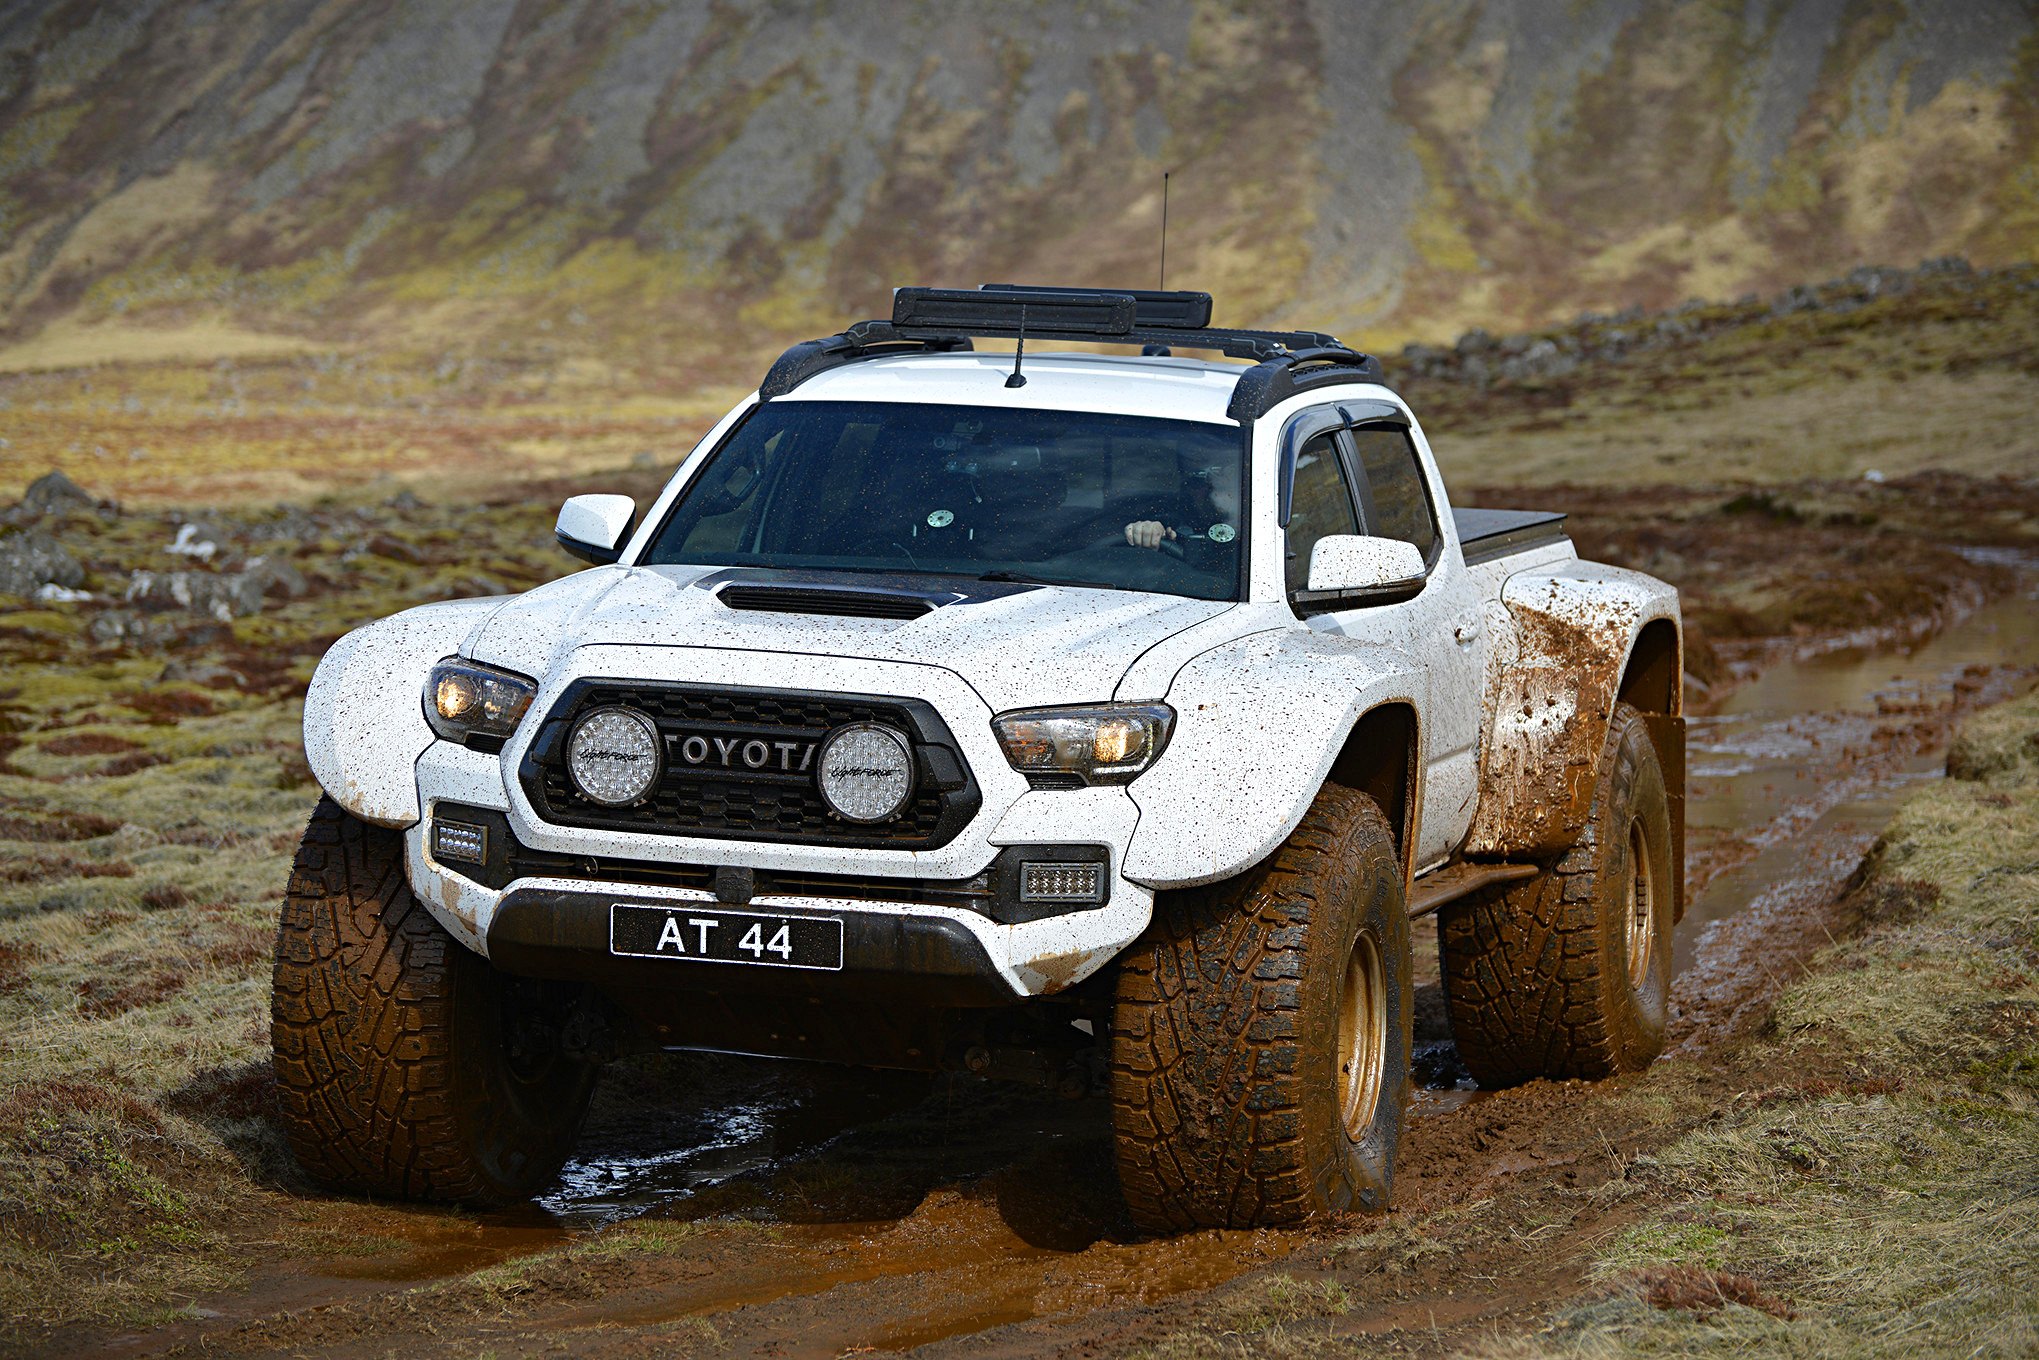 White Lifted Toyota Tacoma with Aftermarket Headlights - Photo by fourwheeler.com